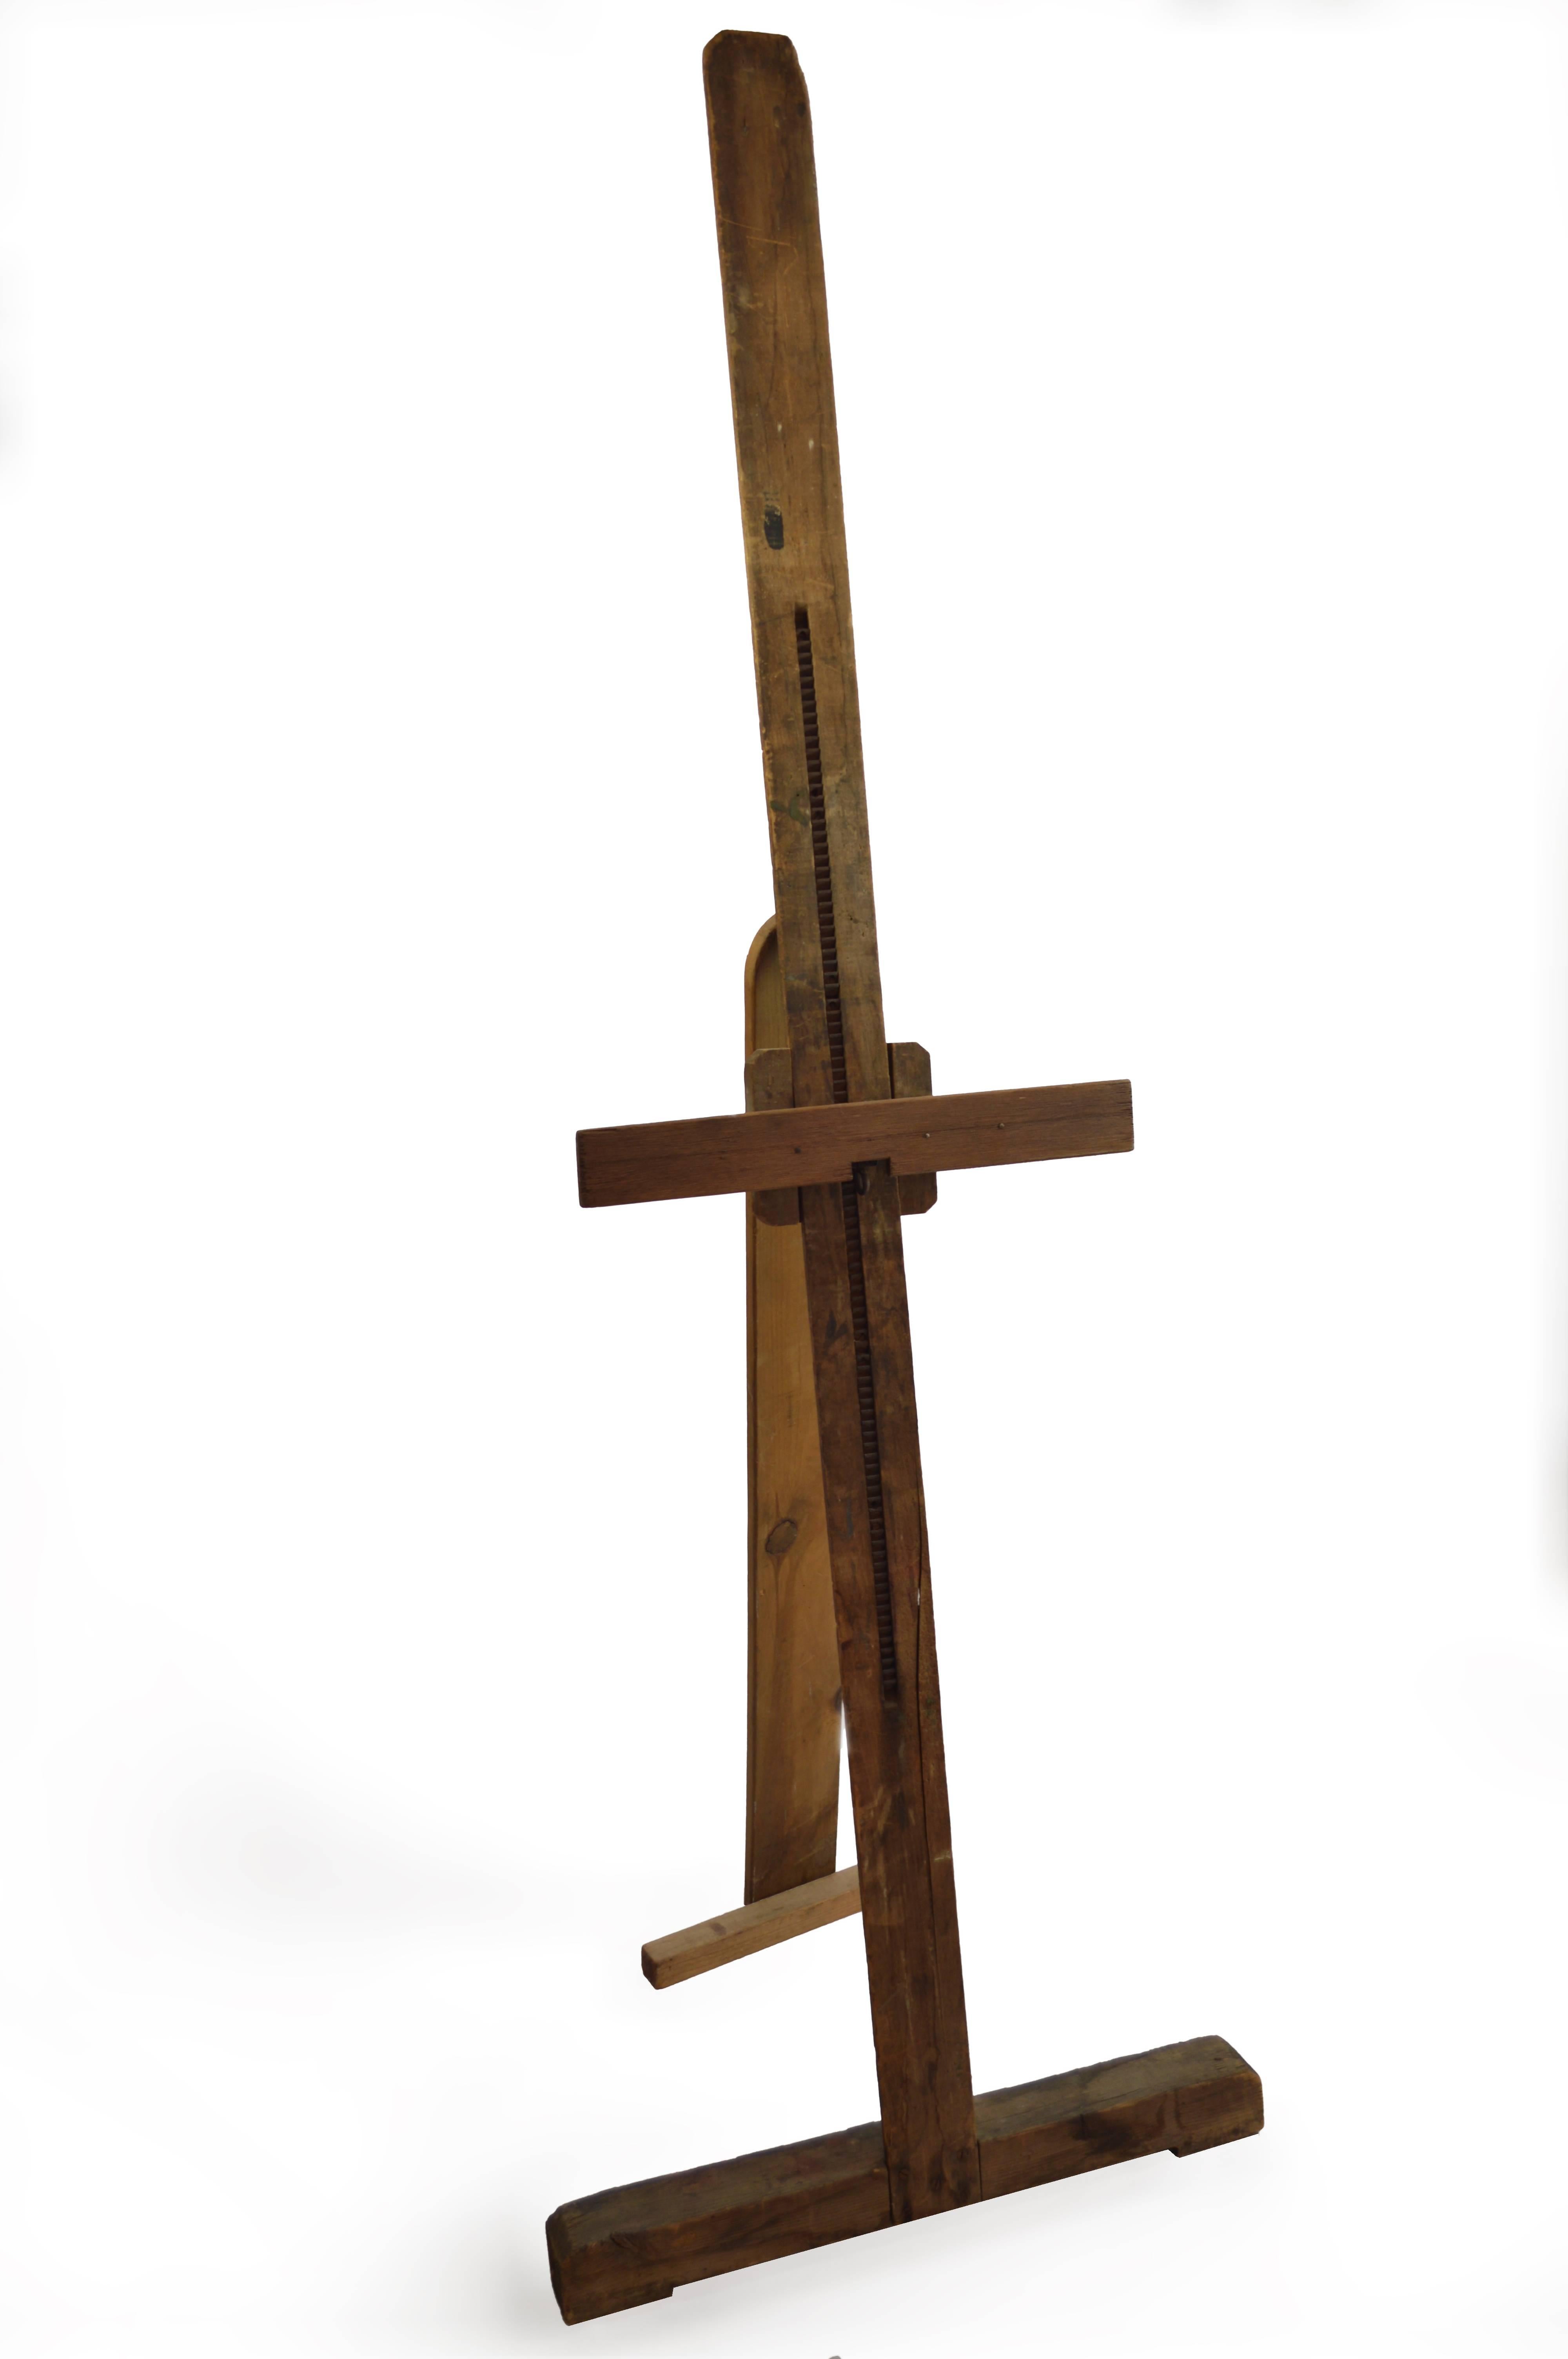 Vintage adjustable artist's easel can be used to display artwork, or as a decorative piece. The crossbar of the easel can be adjusted to your preferred height.